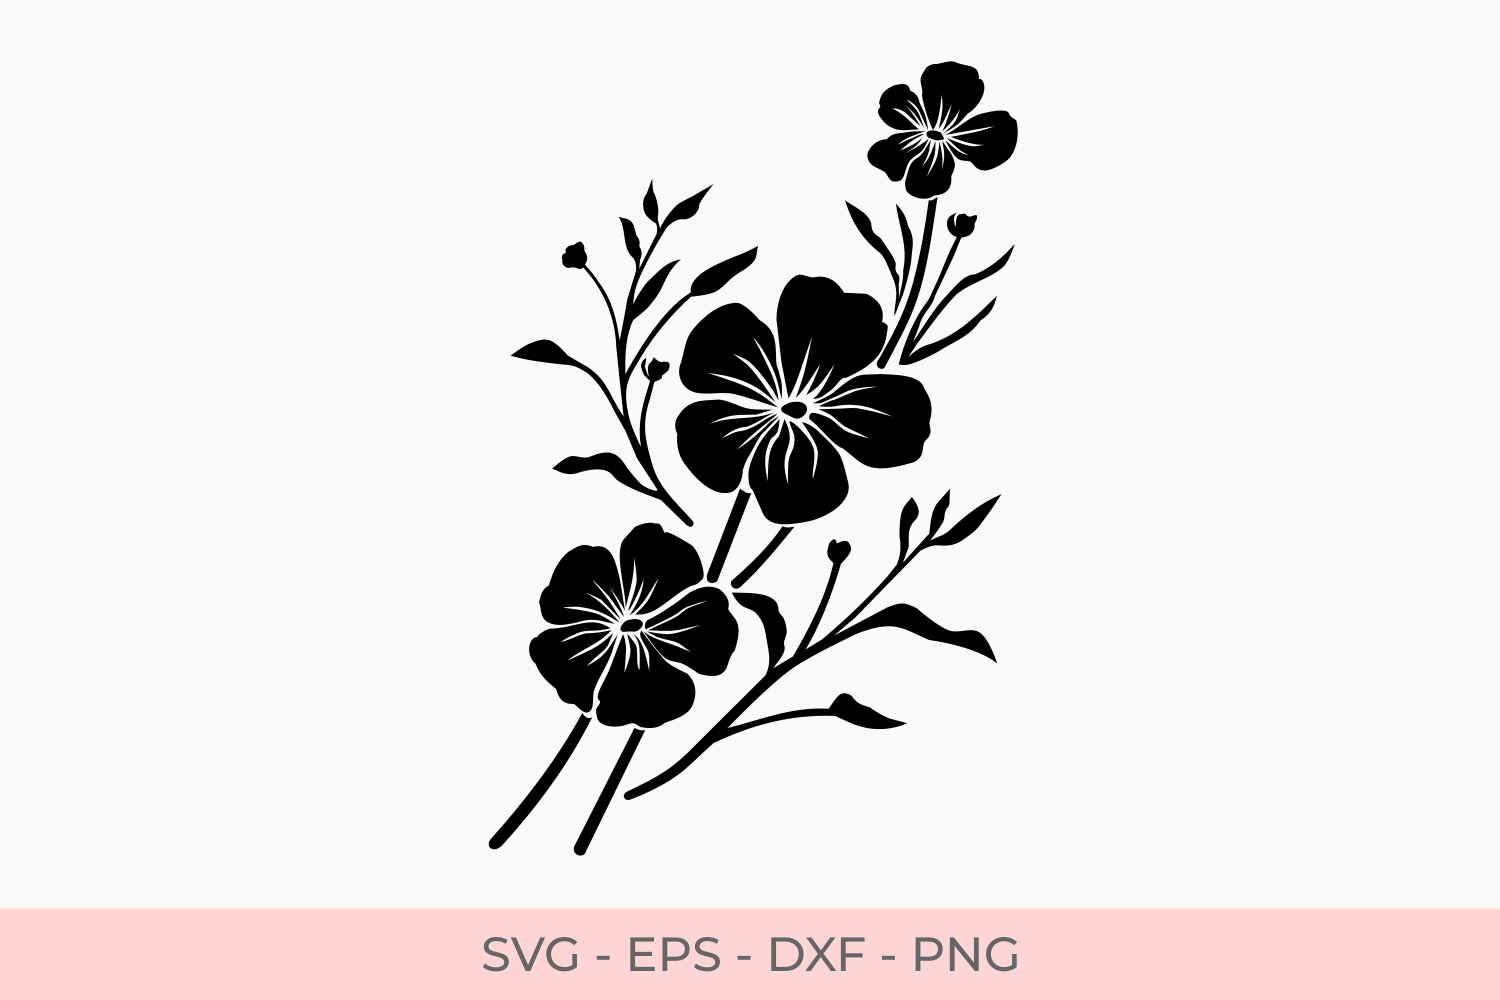 Download Flowers Silhouette Svg, Florals Silhouette Svg, Silhouette ...